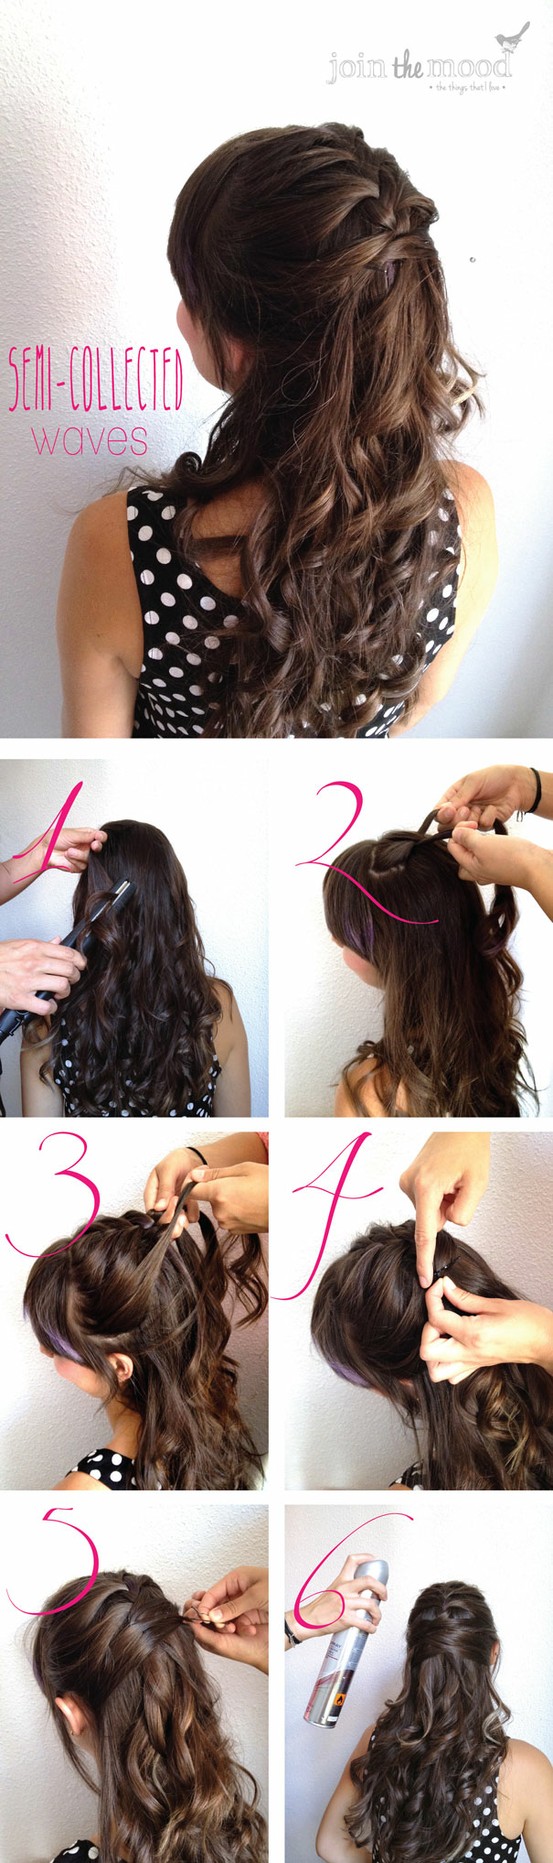 A Collection of 20 Chic Hairstyles for All Occasions -- Semi Collected Waves Hairstyle